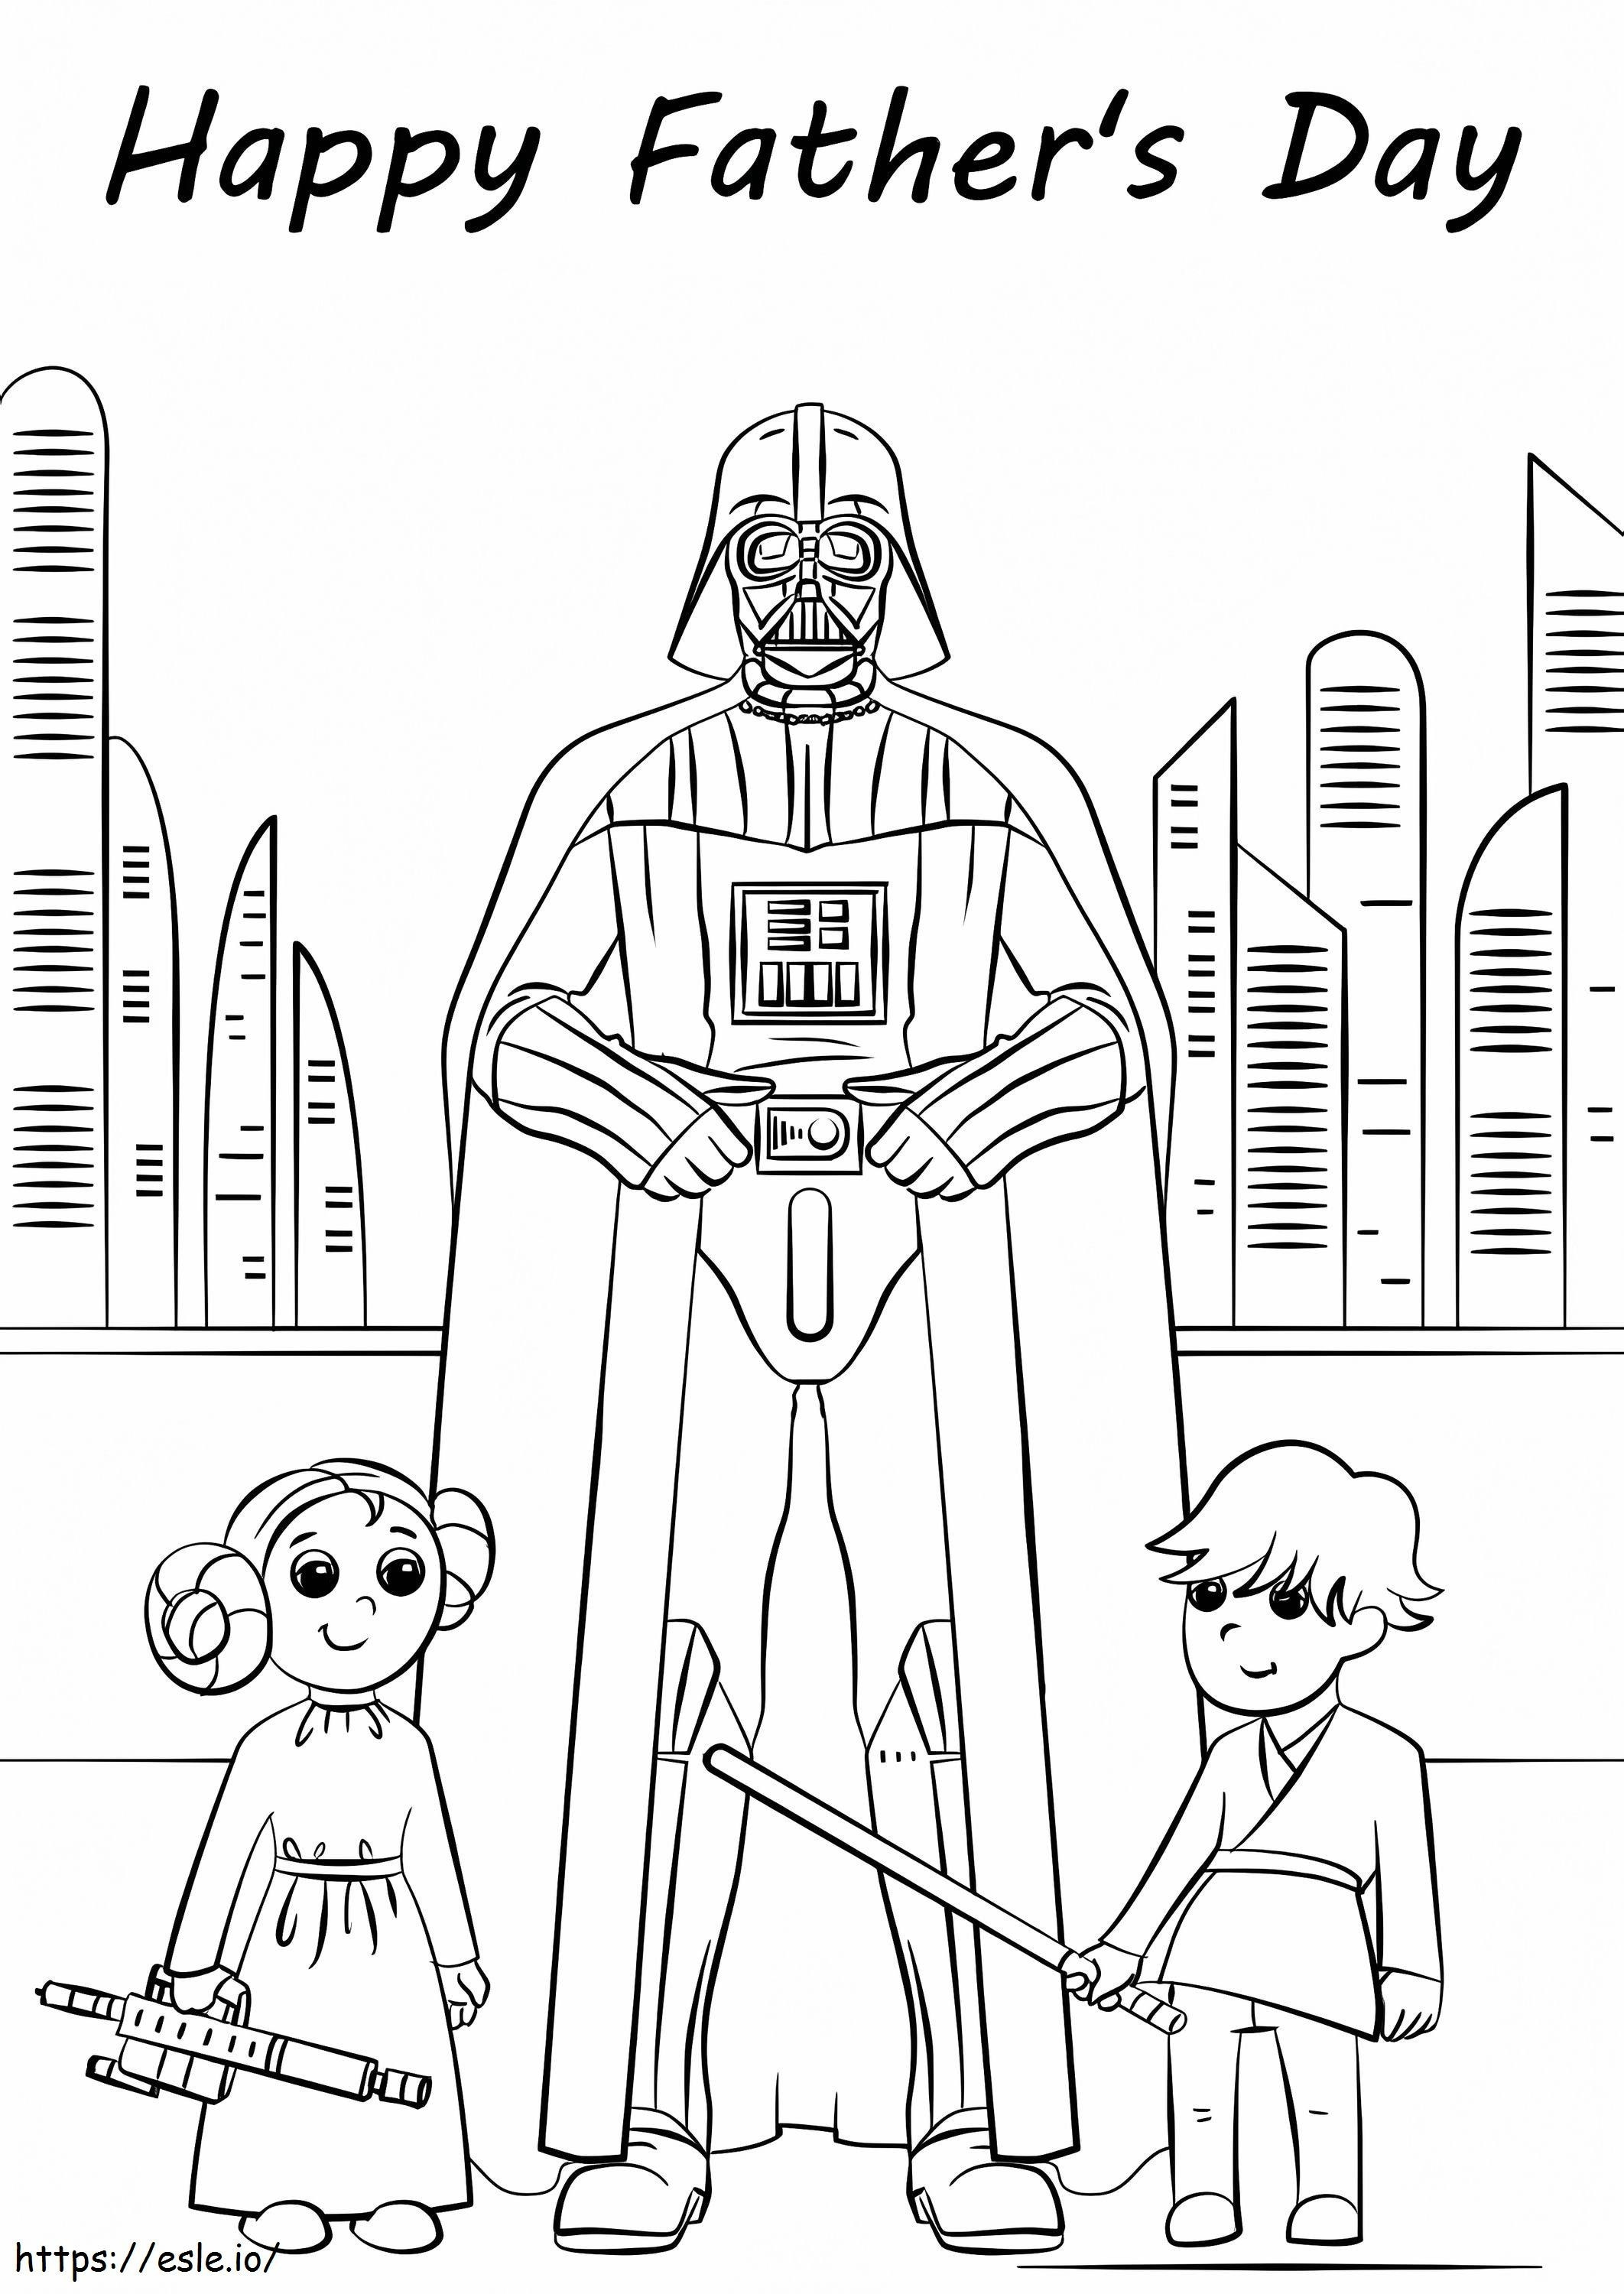 Free Happy Fathers Day coloring page